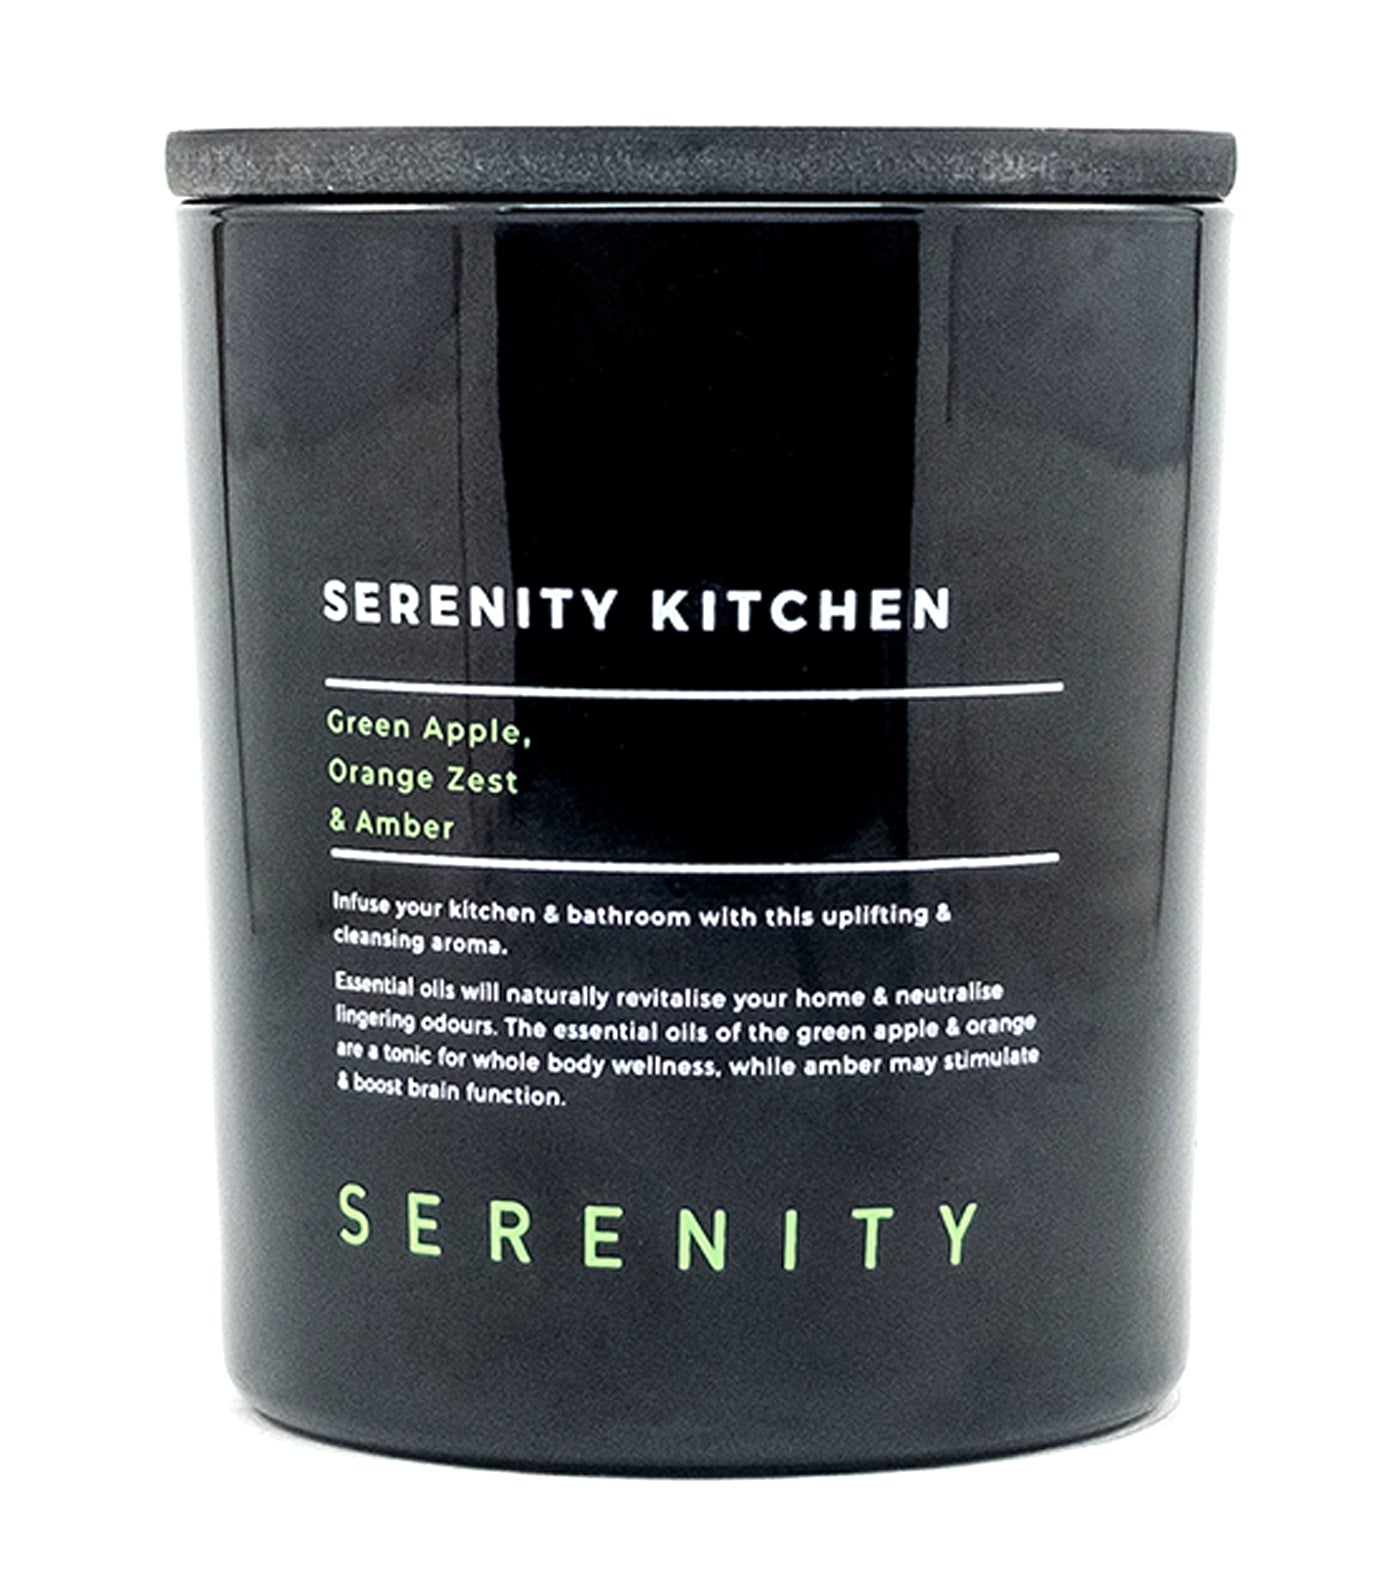 serenity green apple, orange zest, and amber scented candle